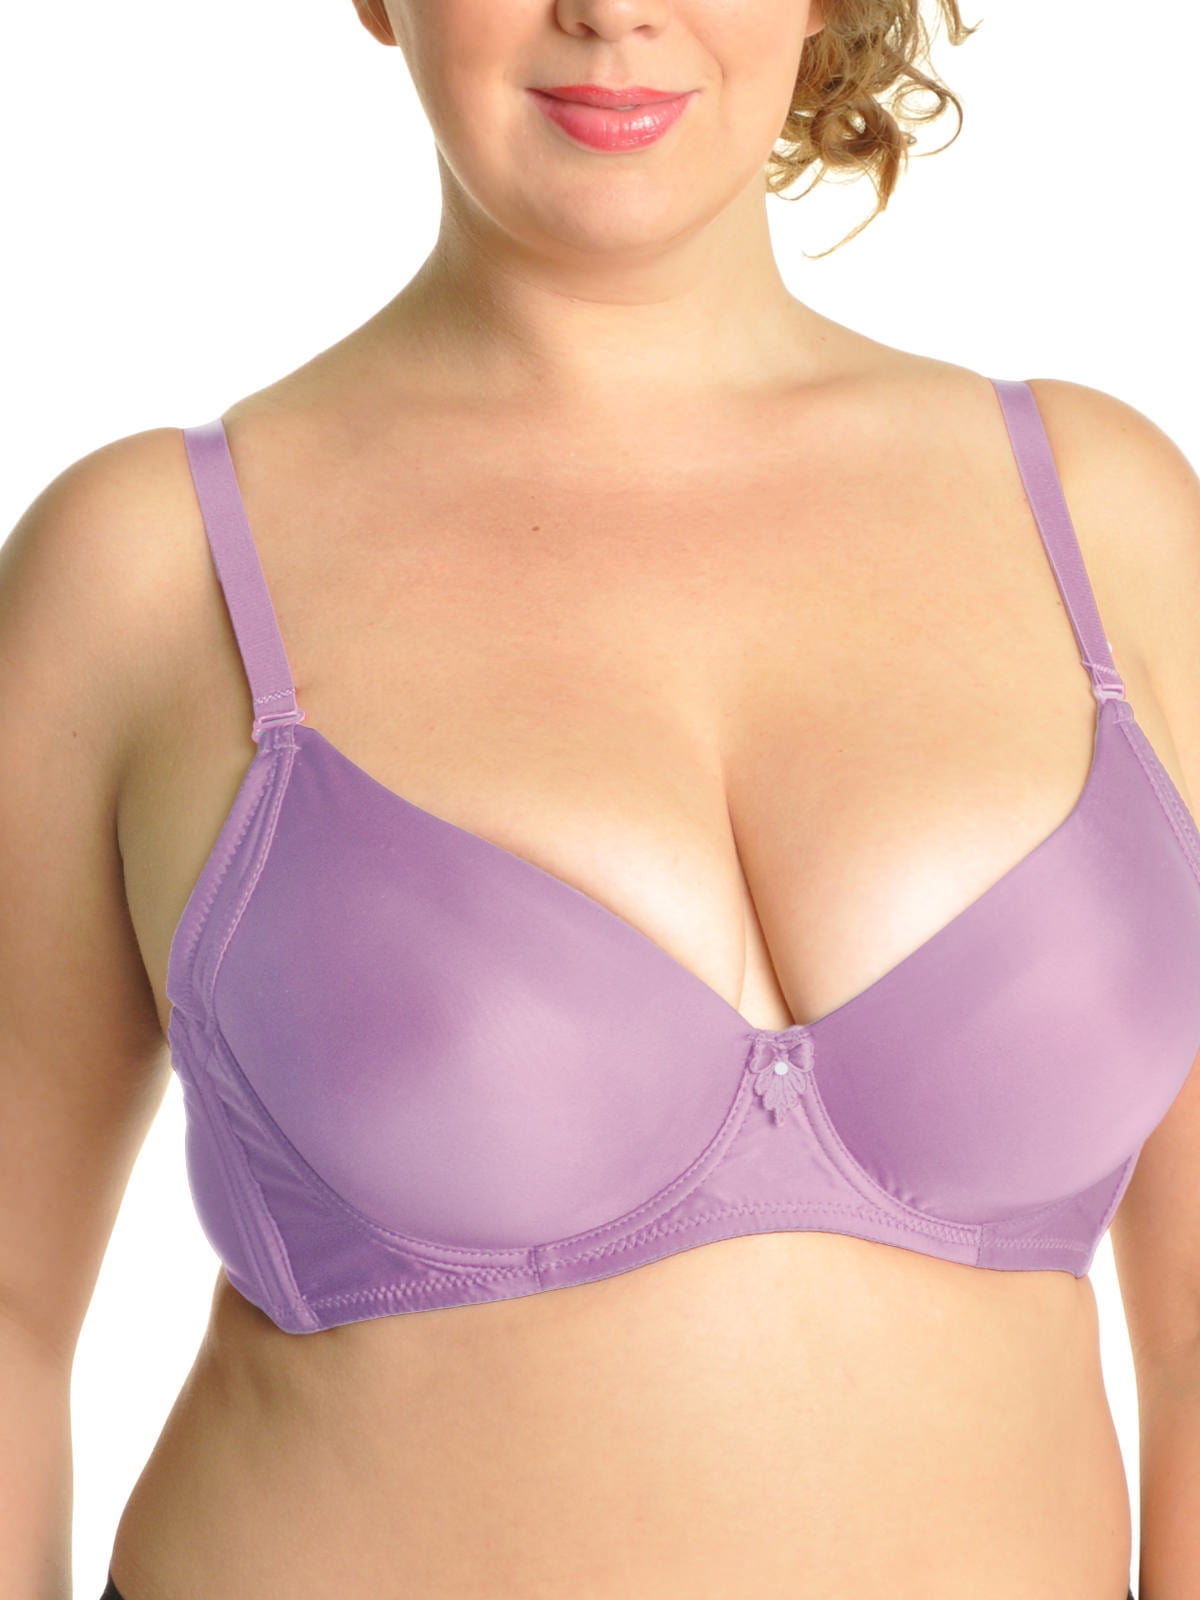 Angelina Wired A-Cup Bras with Swirl Print Design (6-Pack), #B377A